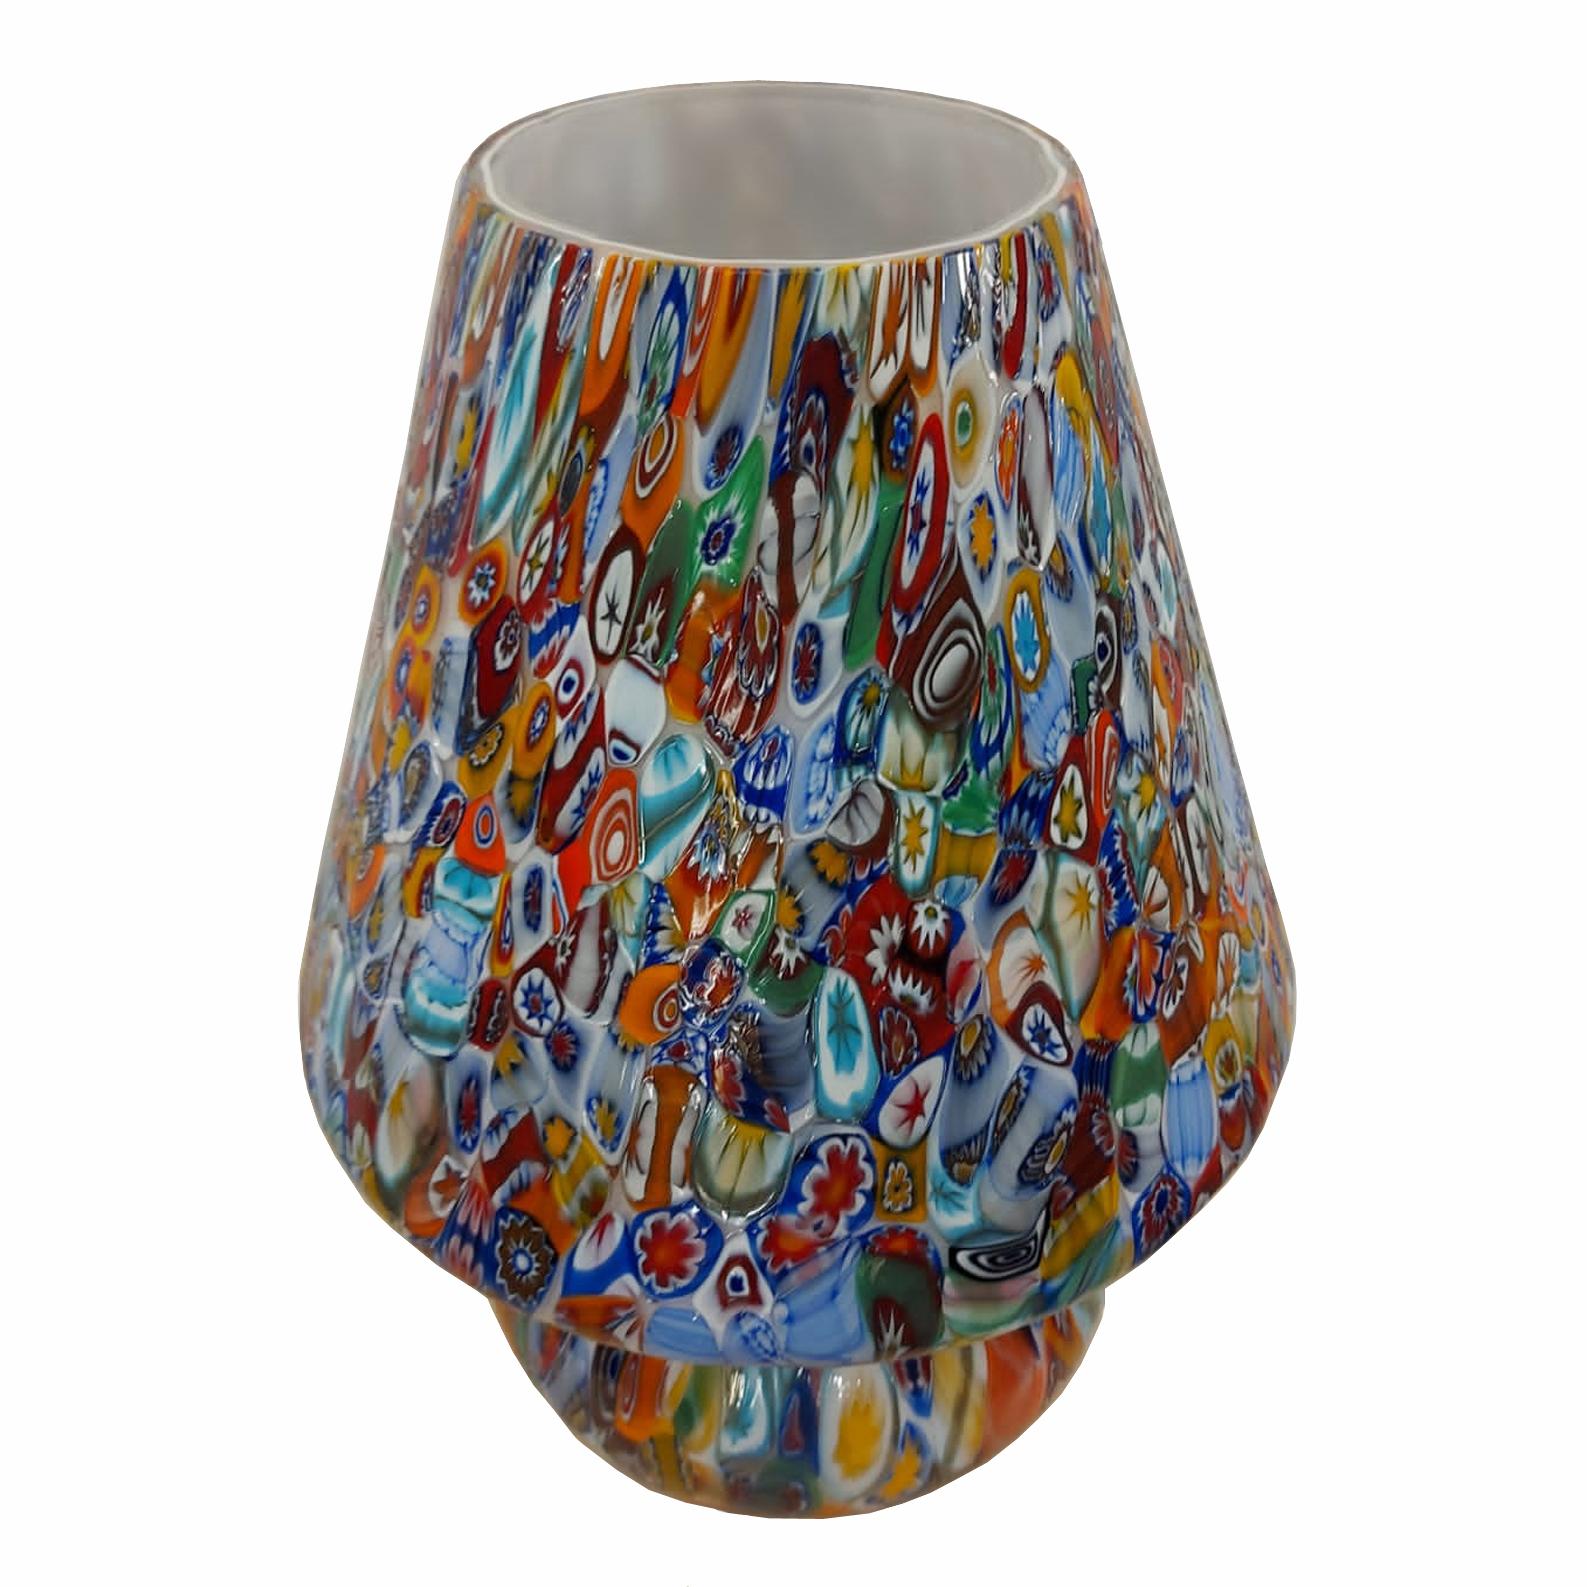 Table lamp made entirely with murrine millefiori murano glass.
Handcrafted by Murano glass master artisan. Custom made by hand and each piece differs from the other. Limited edition.
The murrina technique involves slicing canes of glass to expose